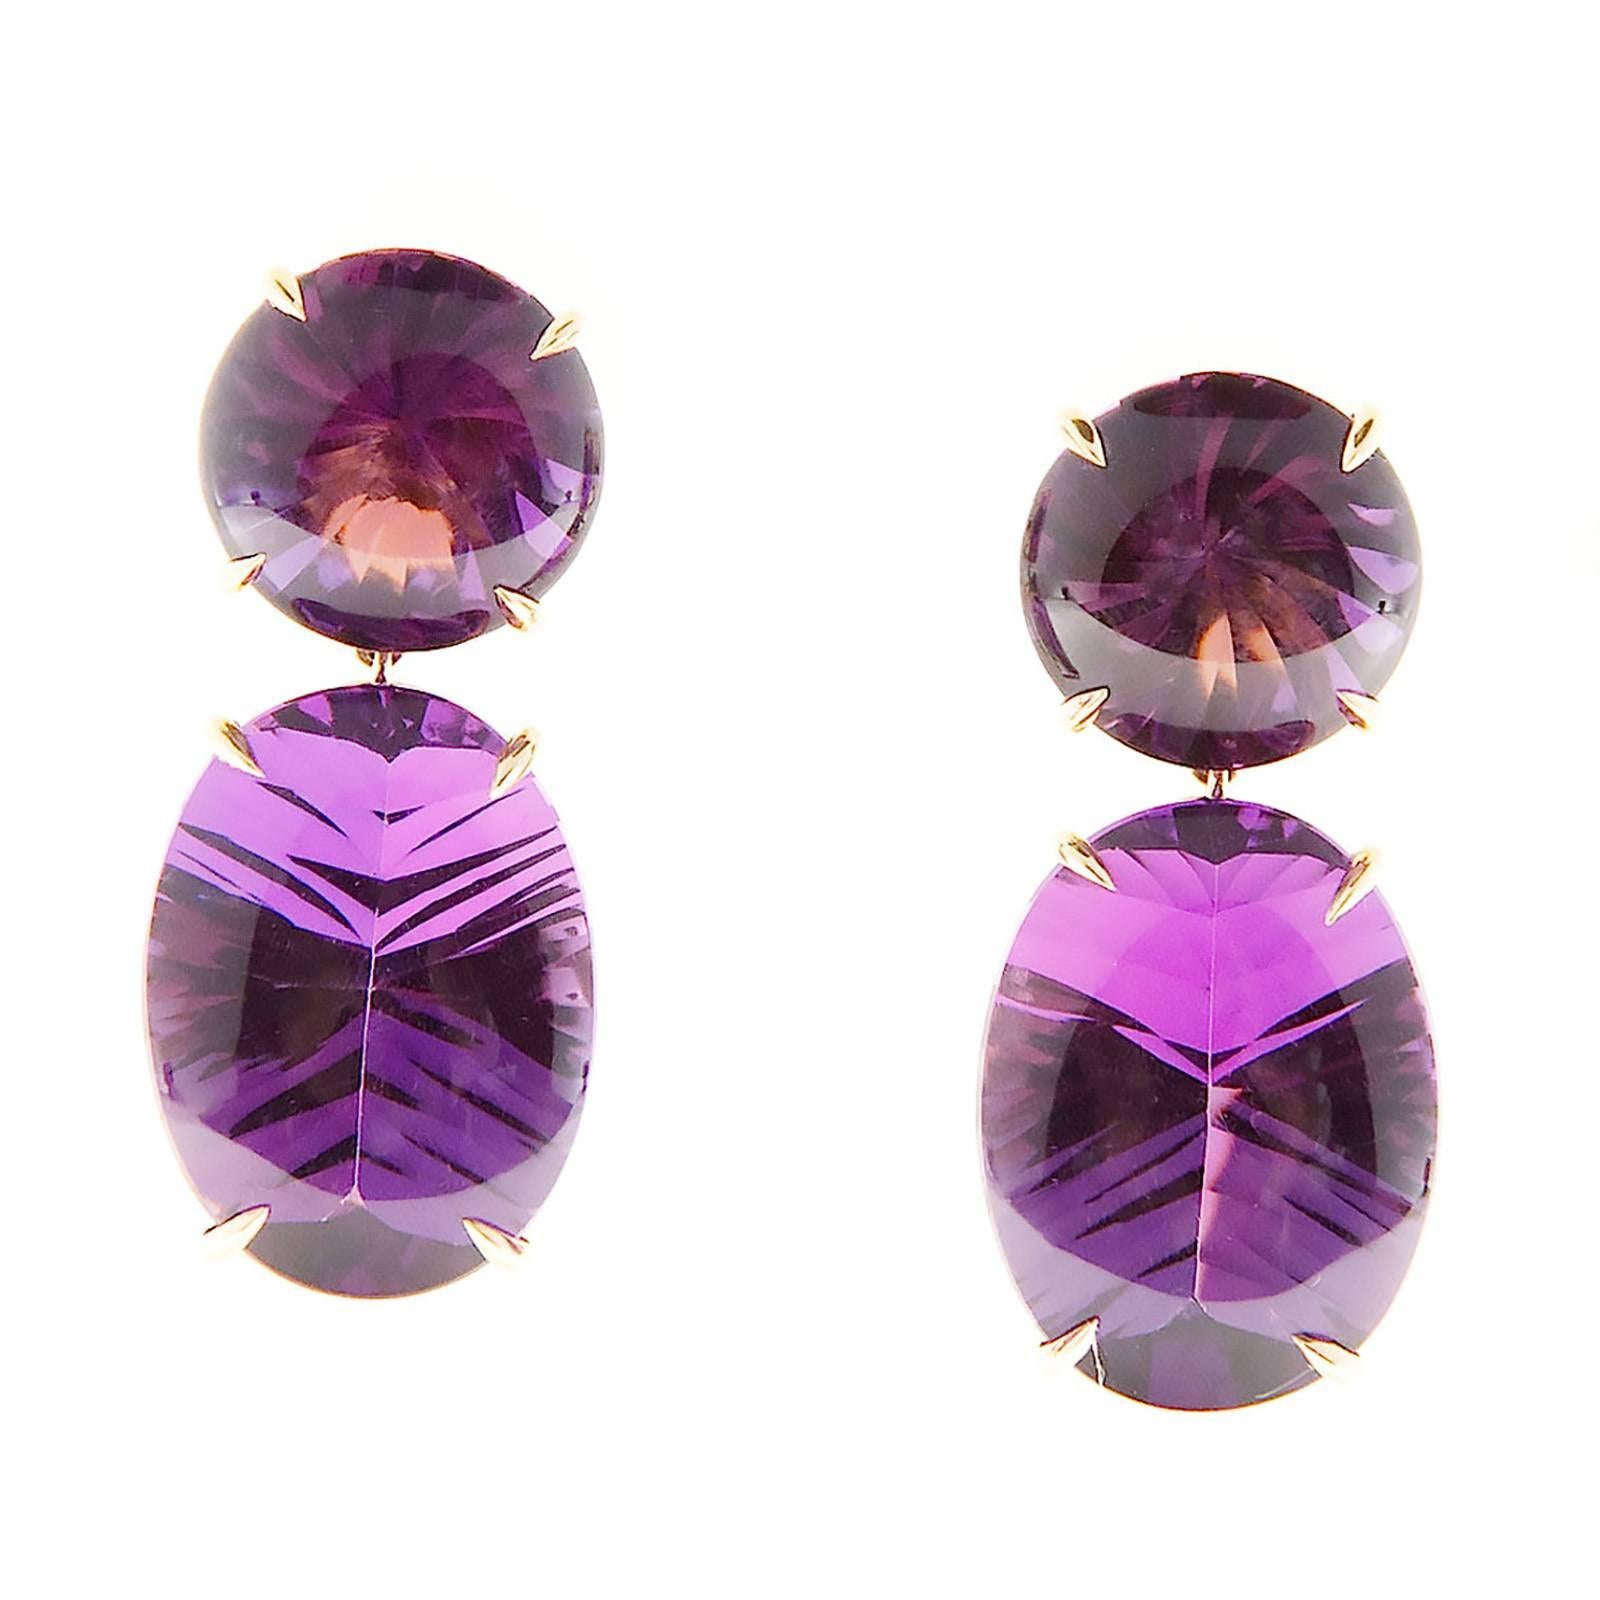 Custom top gem natural Amethyst Fantasy cut on the bottom for attractive sparkle. Earrings made in the Peter Suchy Workshop. 

2 round 13mm natural bright purple Amethyst, approx. total weight 13.79cts, VS, domed top Fantasy cut bottom
2 natural